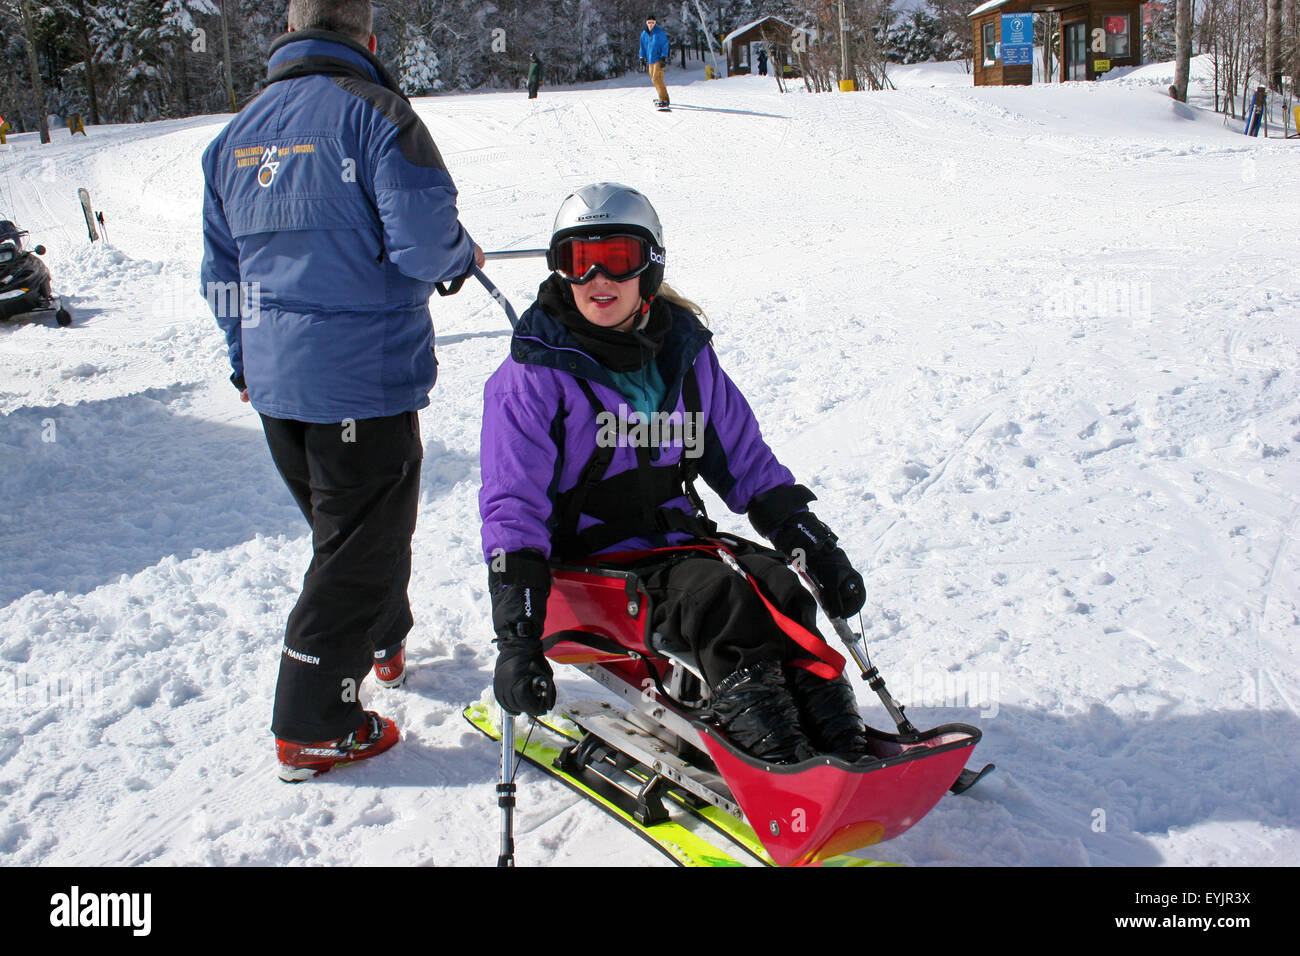 Woman with a disability learning to sit ski at Snowshoe Resort, West Virginia Stock Photo